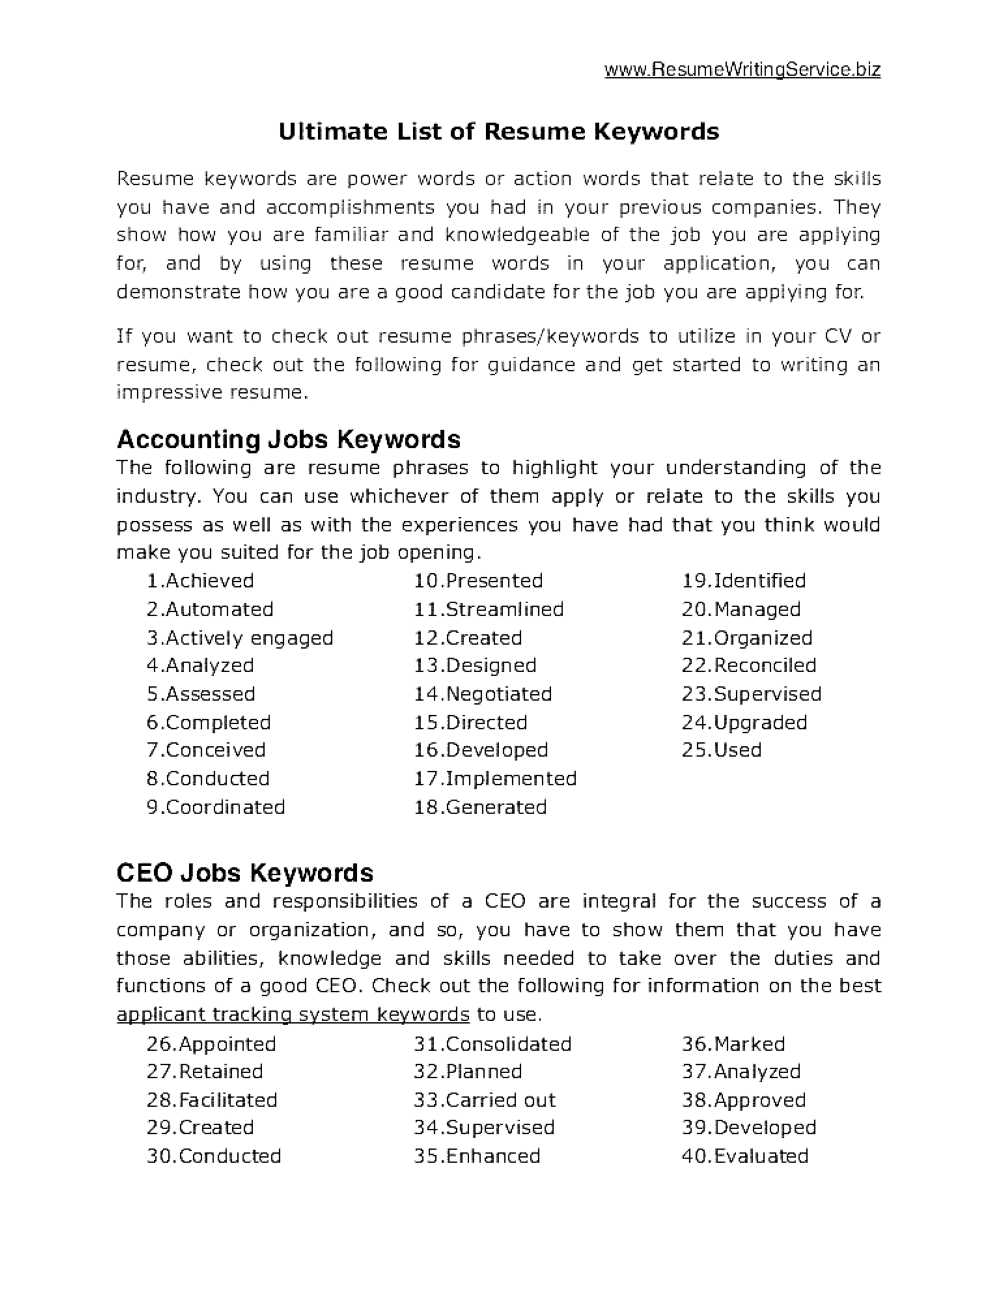 Resume Action Words Keywords Cover Letter Action Words Verbs Resume For Resumes By Category Key Phrases To Use In resume action words|wikiresume.com